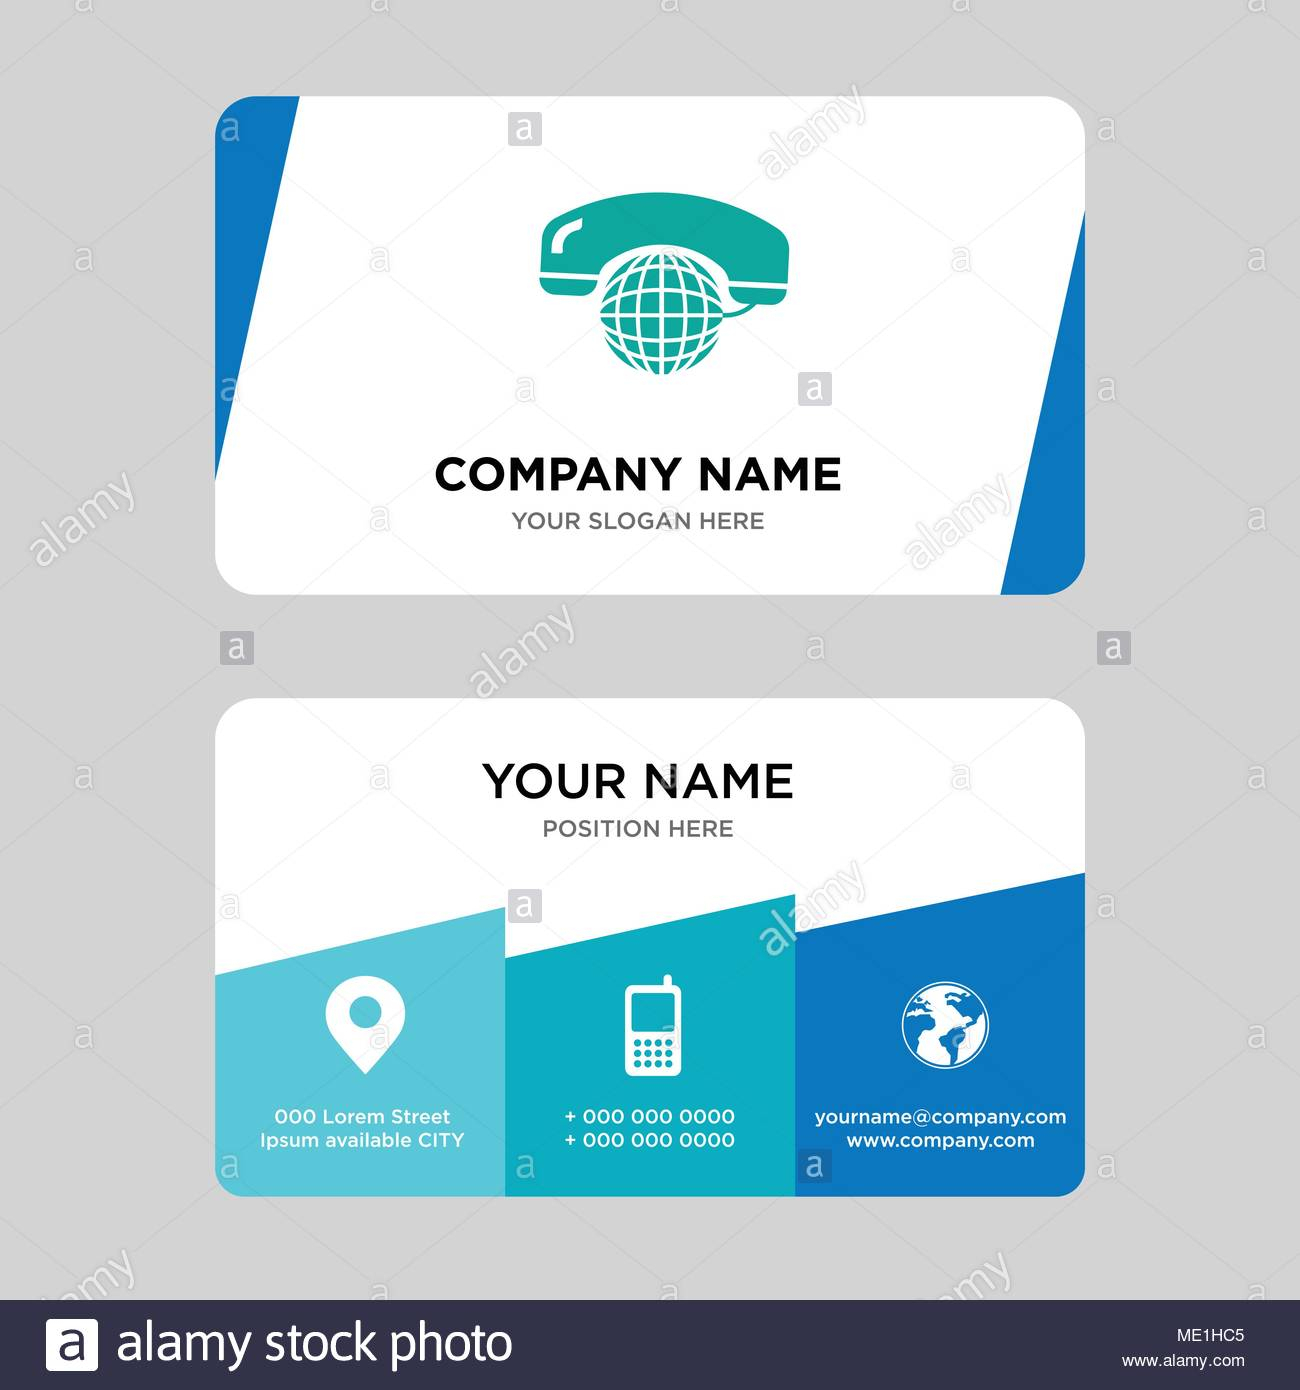 International Calling Service Business Card Design Template Pertaining To Template For Calling Card